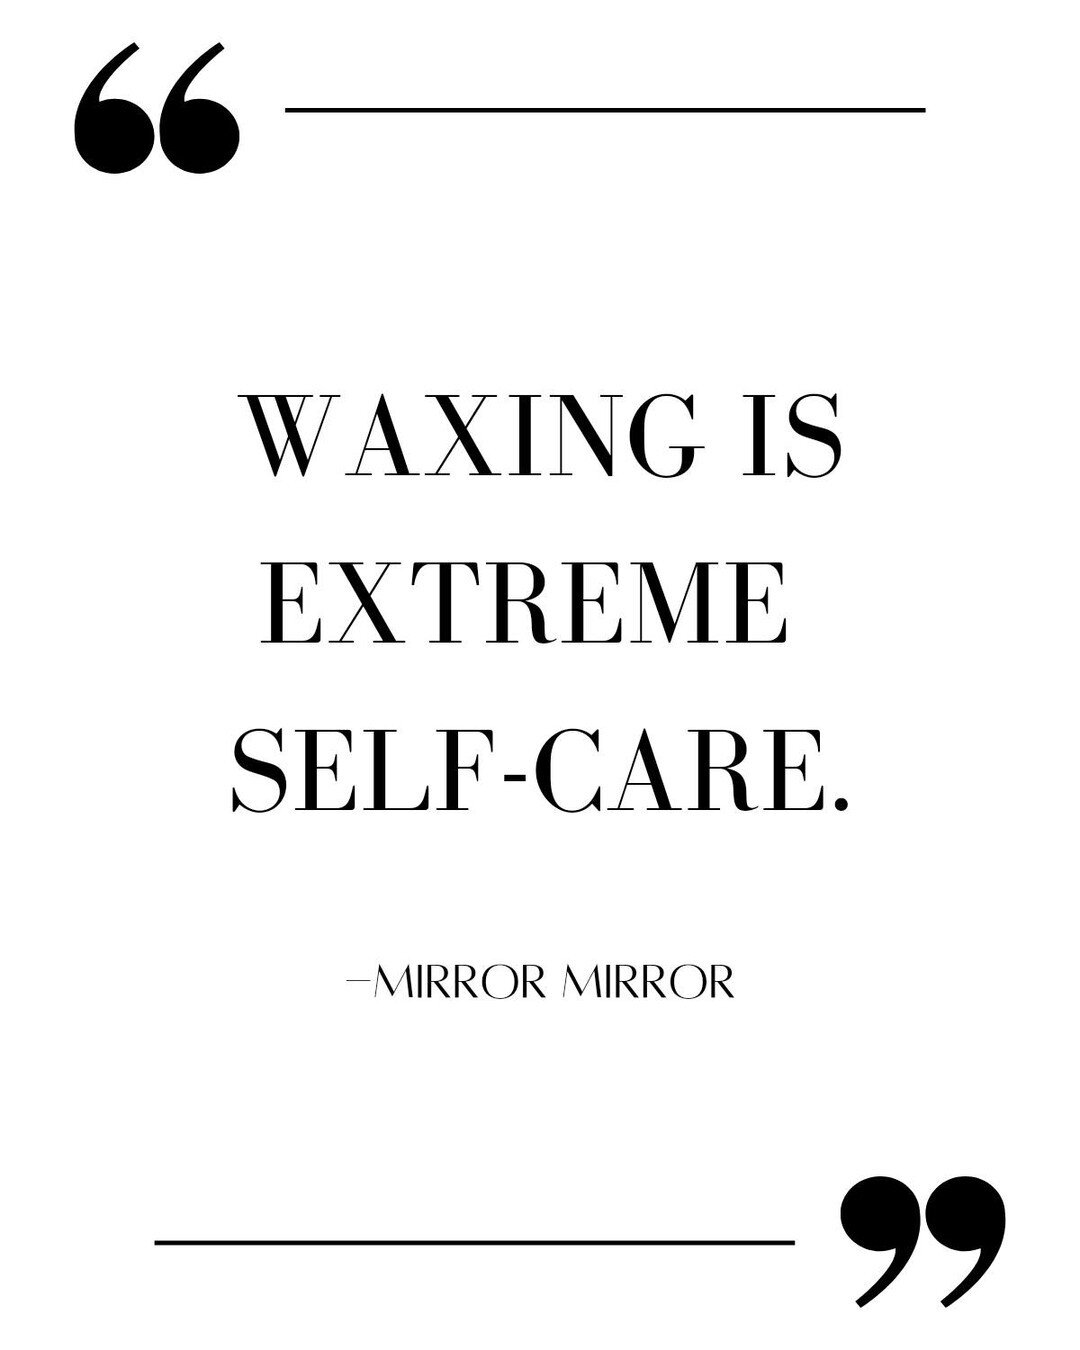 It may not be as relaxing as a facial treatment.. but I find it just as restorative 🧘&zwj;♀️
.
.
#mirrormirroresthetics #mirrormirrorlodi #skin #skincare #lodifacial #lodiwaxing #brows #brazilianwax #chemicalpeel #microdermabrasion #lodica #downtown